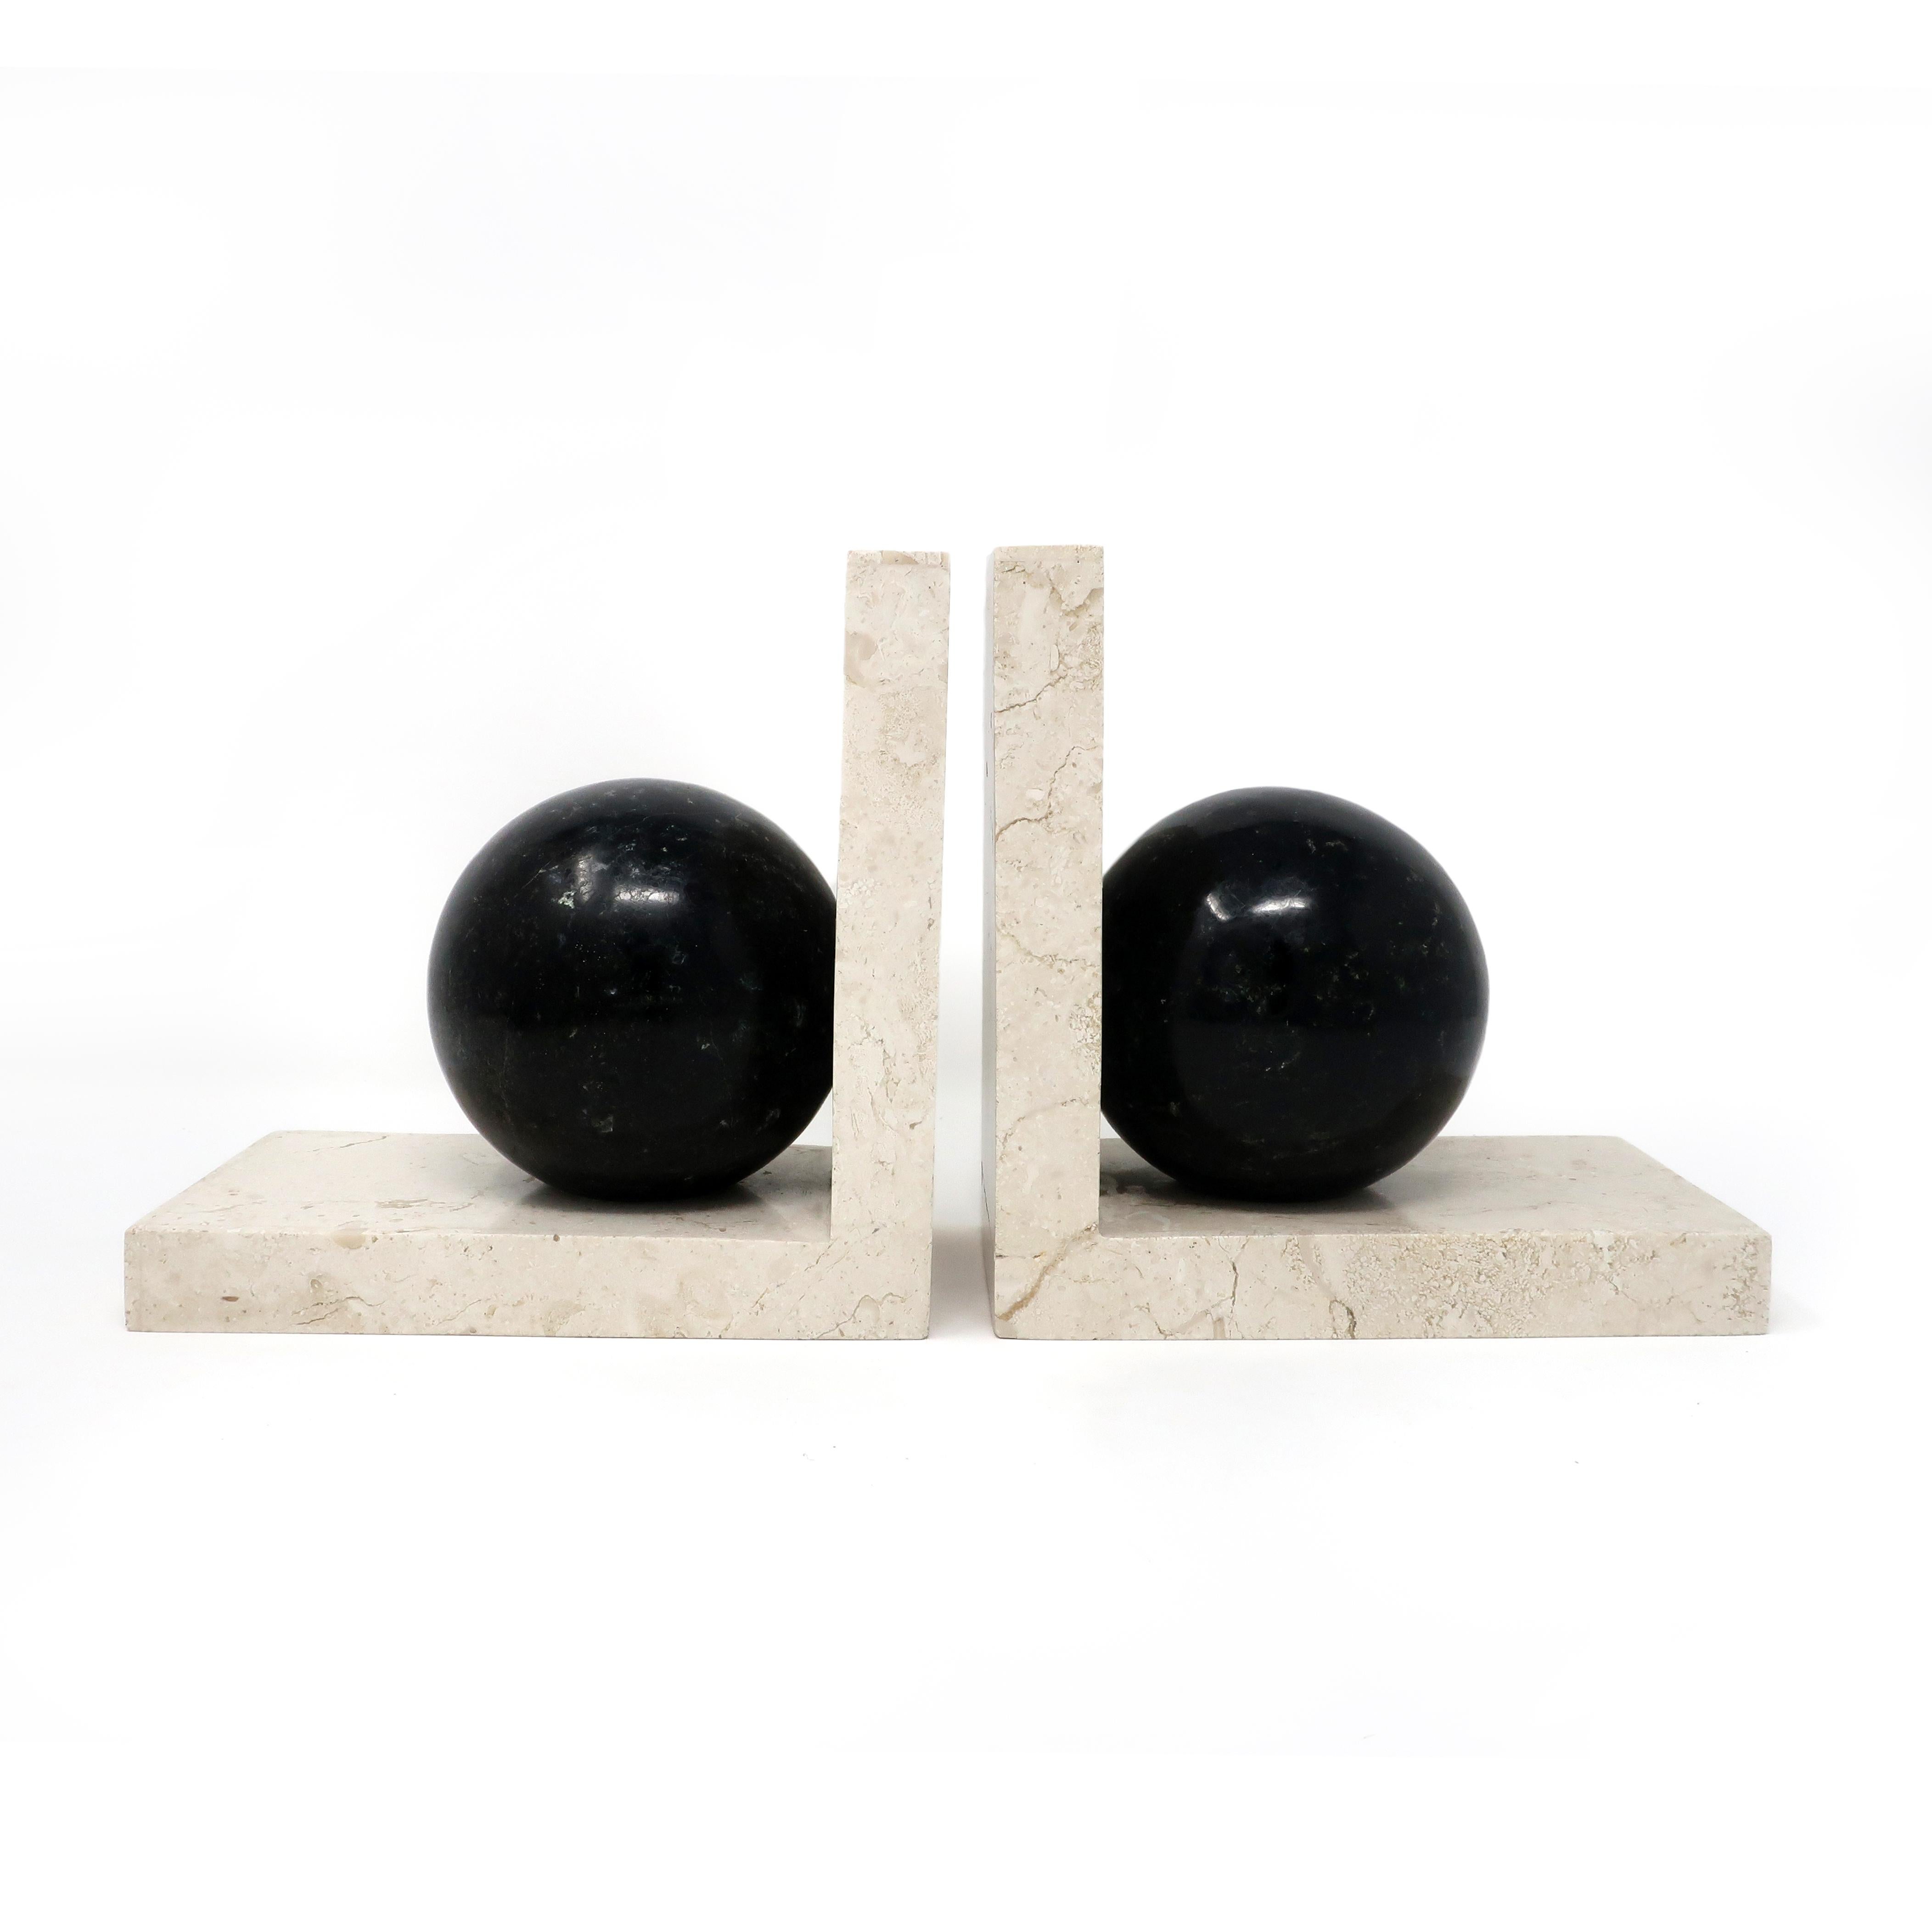 A pair of marble Art Deco bookends by Renoir with a perfect right angle in light stone holding a dark stone sphere. In good vintage condition with wear consistent with age and use. Each piece has a maker’s sticker on underside.

Measures: 7